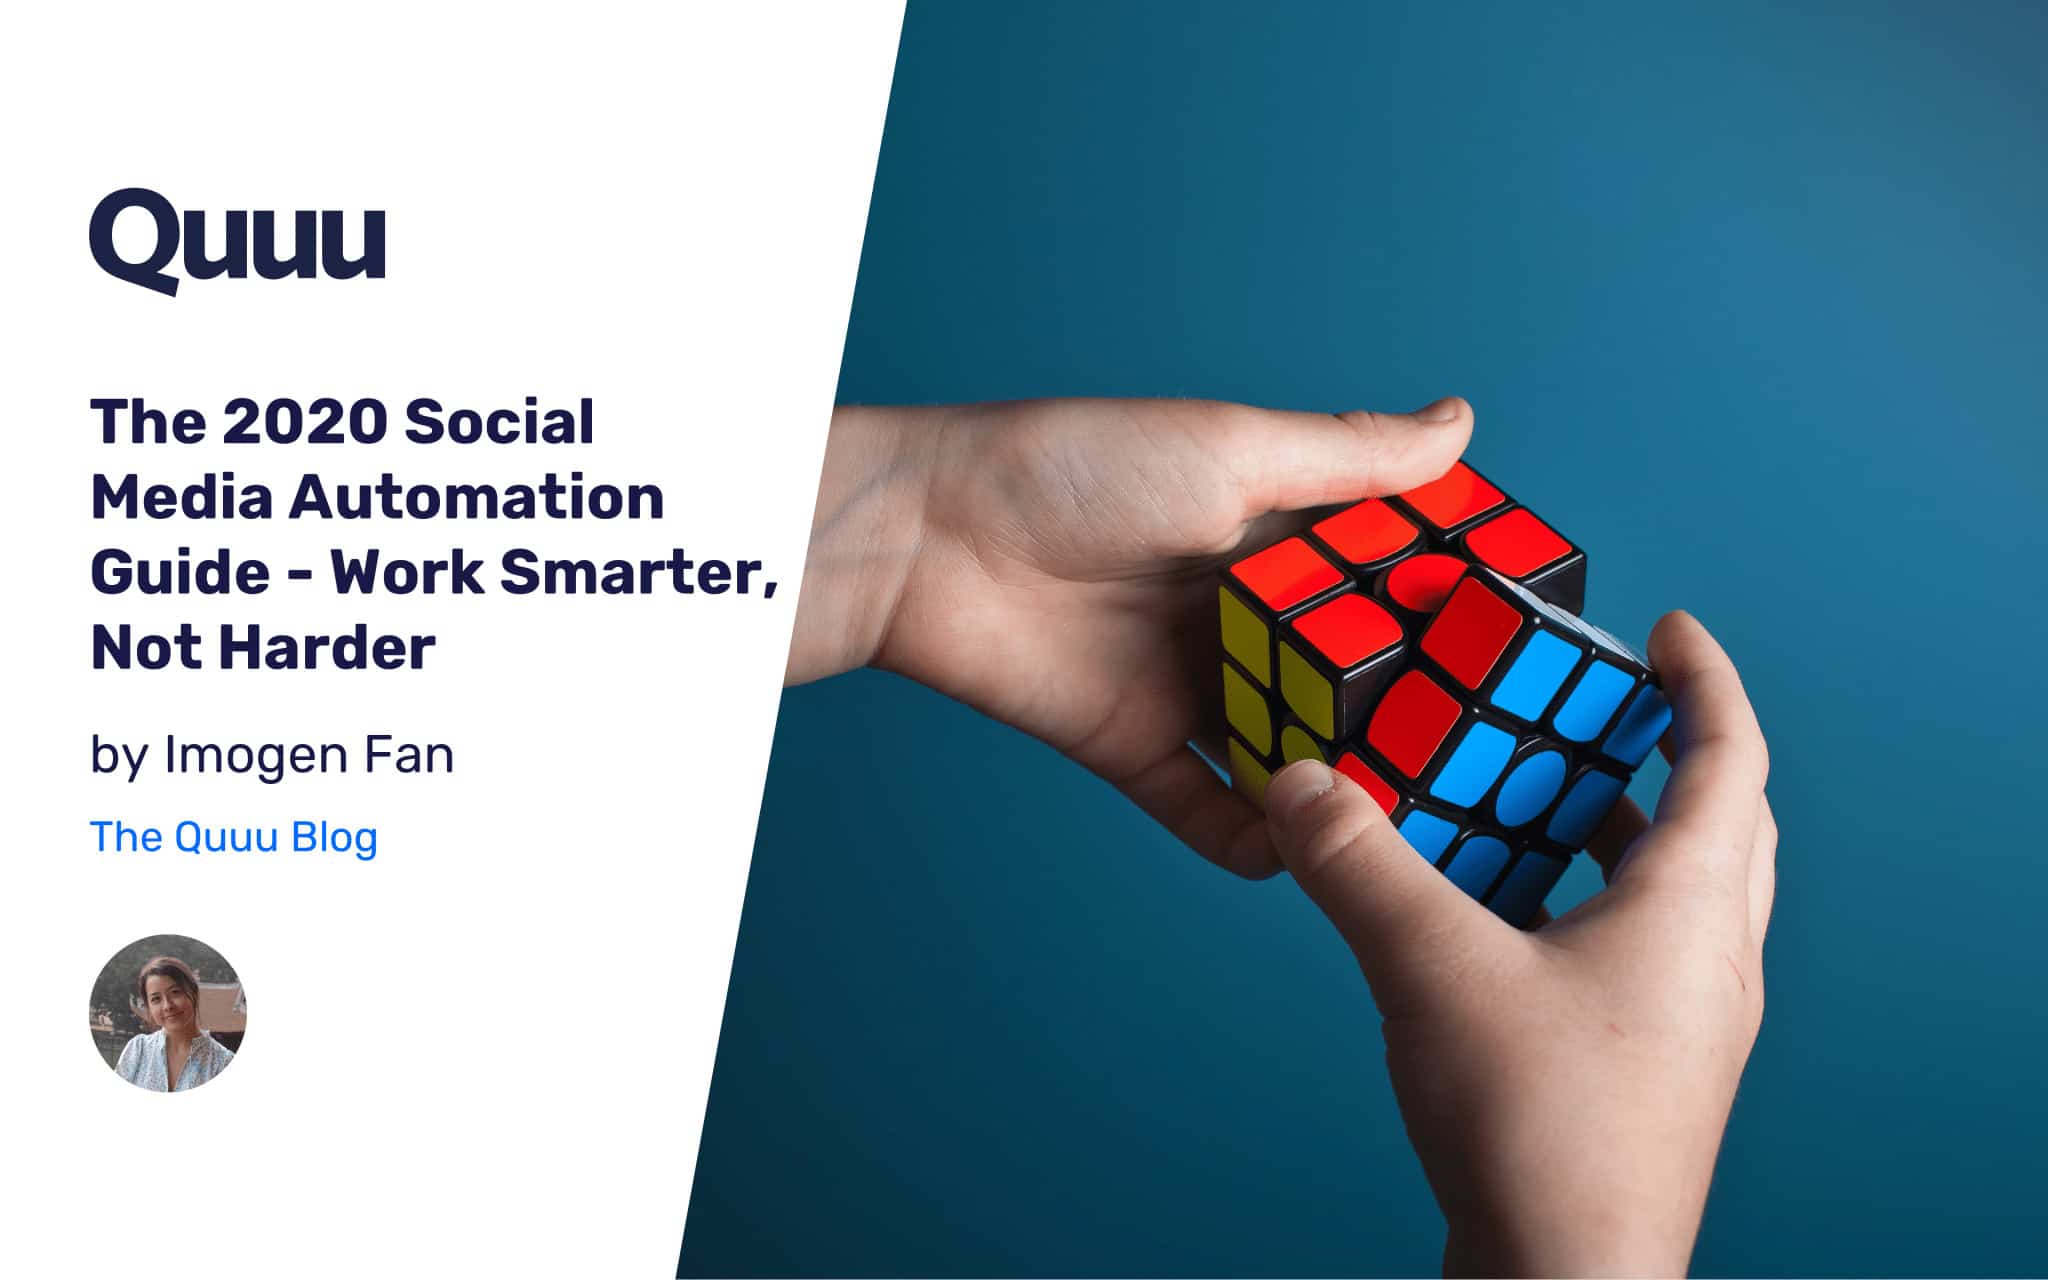 The 2020 Social Media Automation Guide - Work Smarter, Not Harder